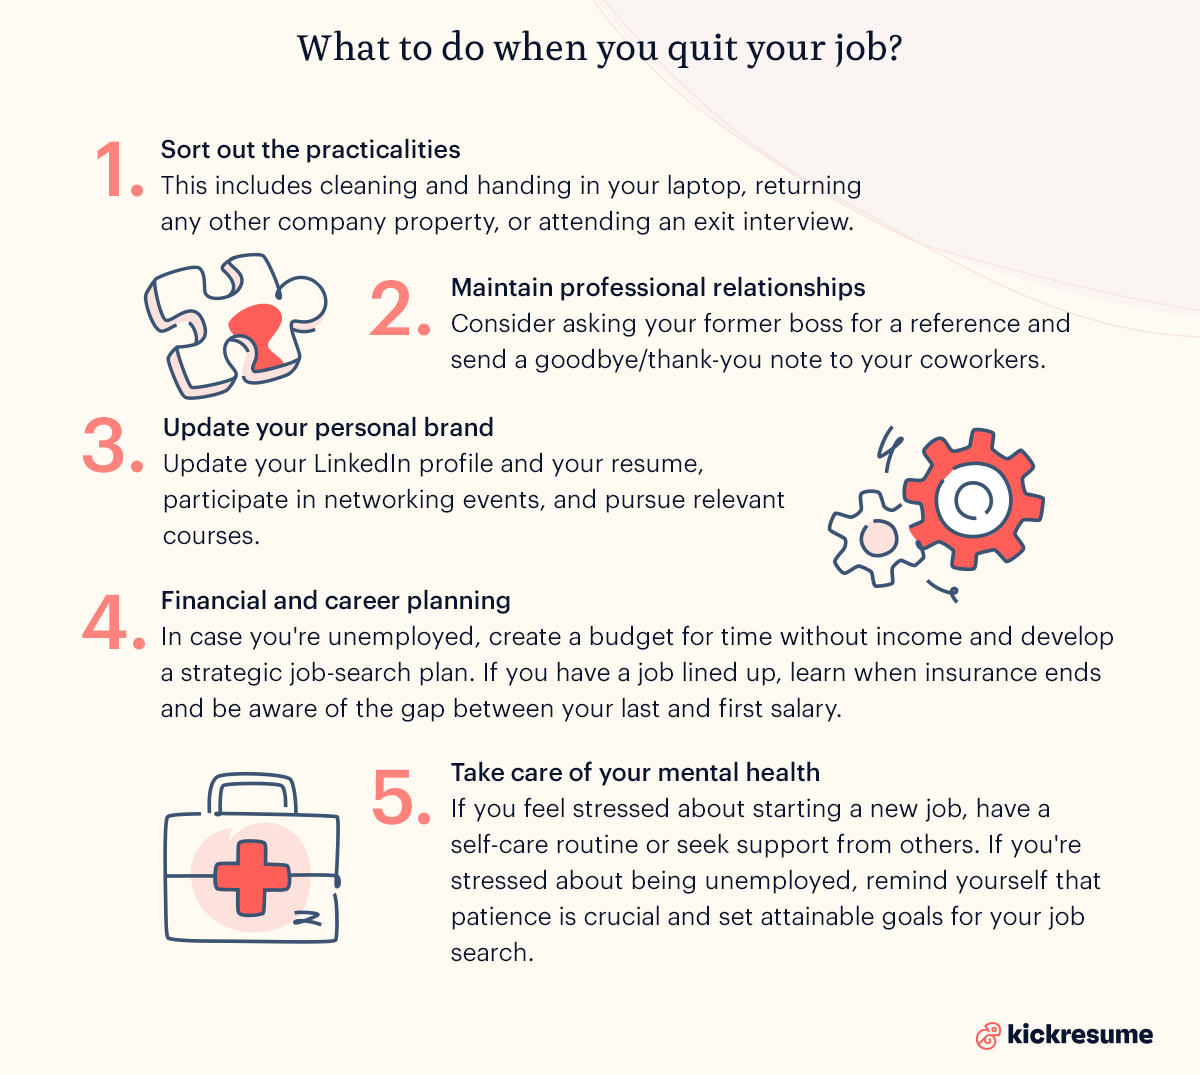 What to do when you quit your job